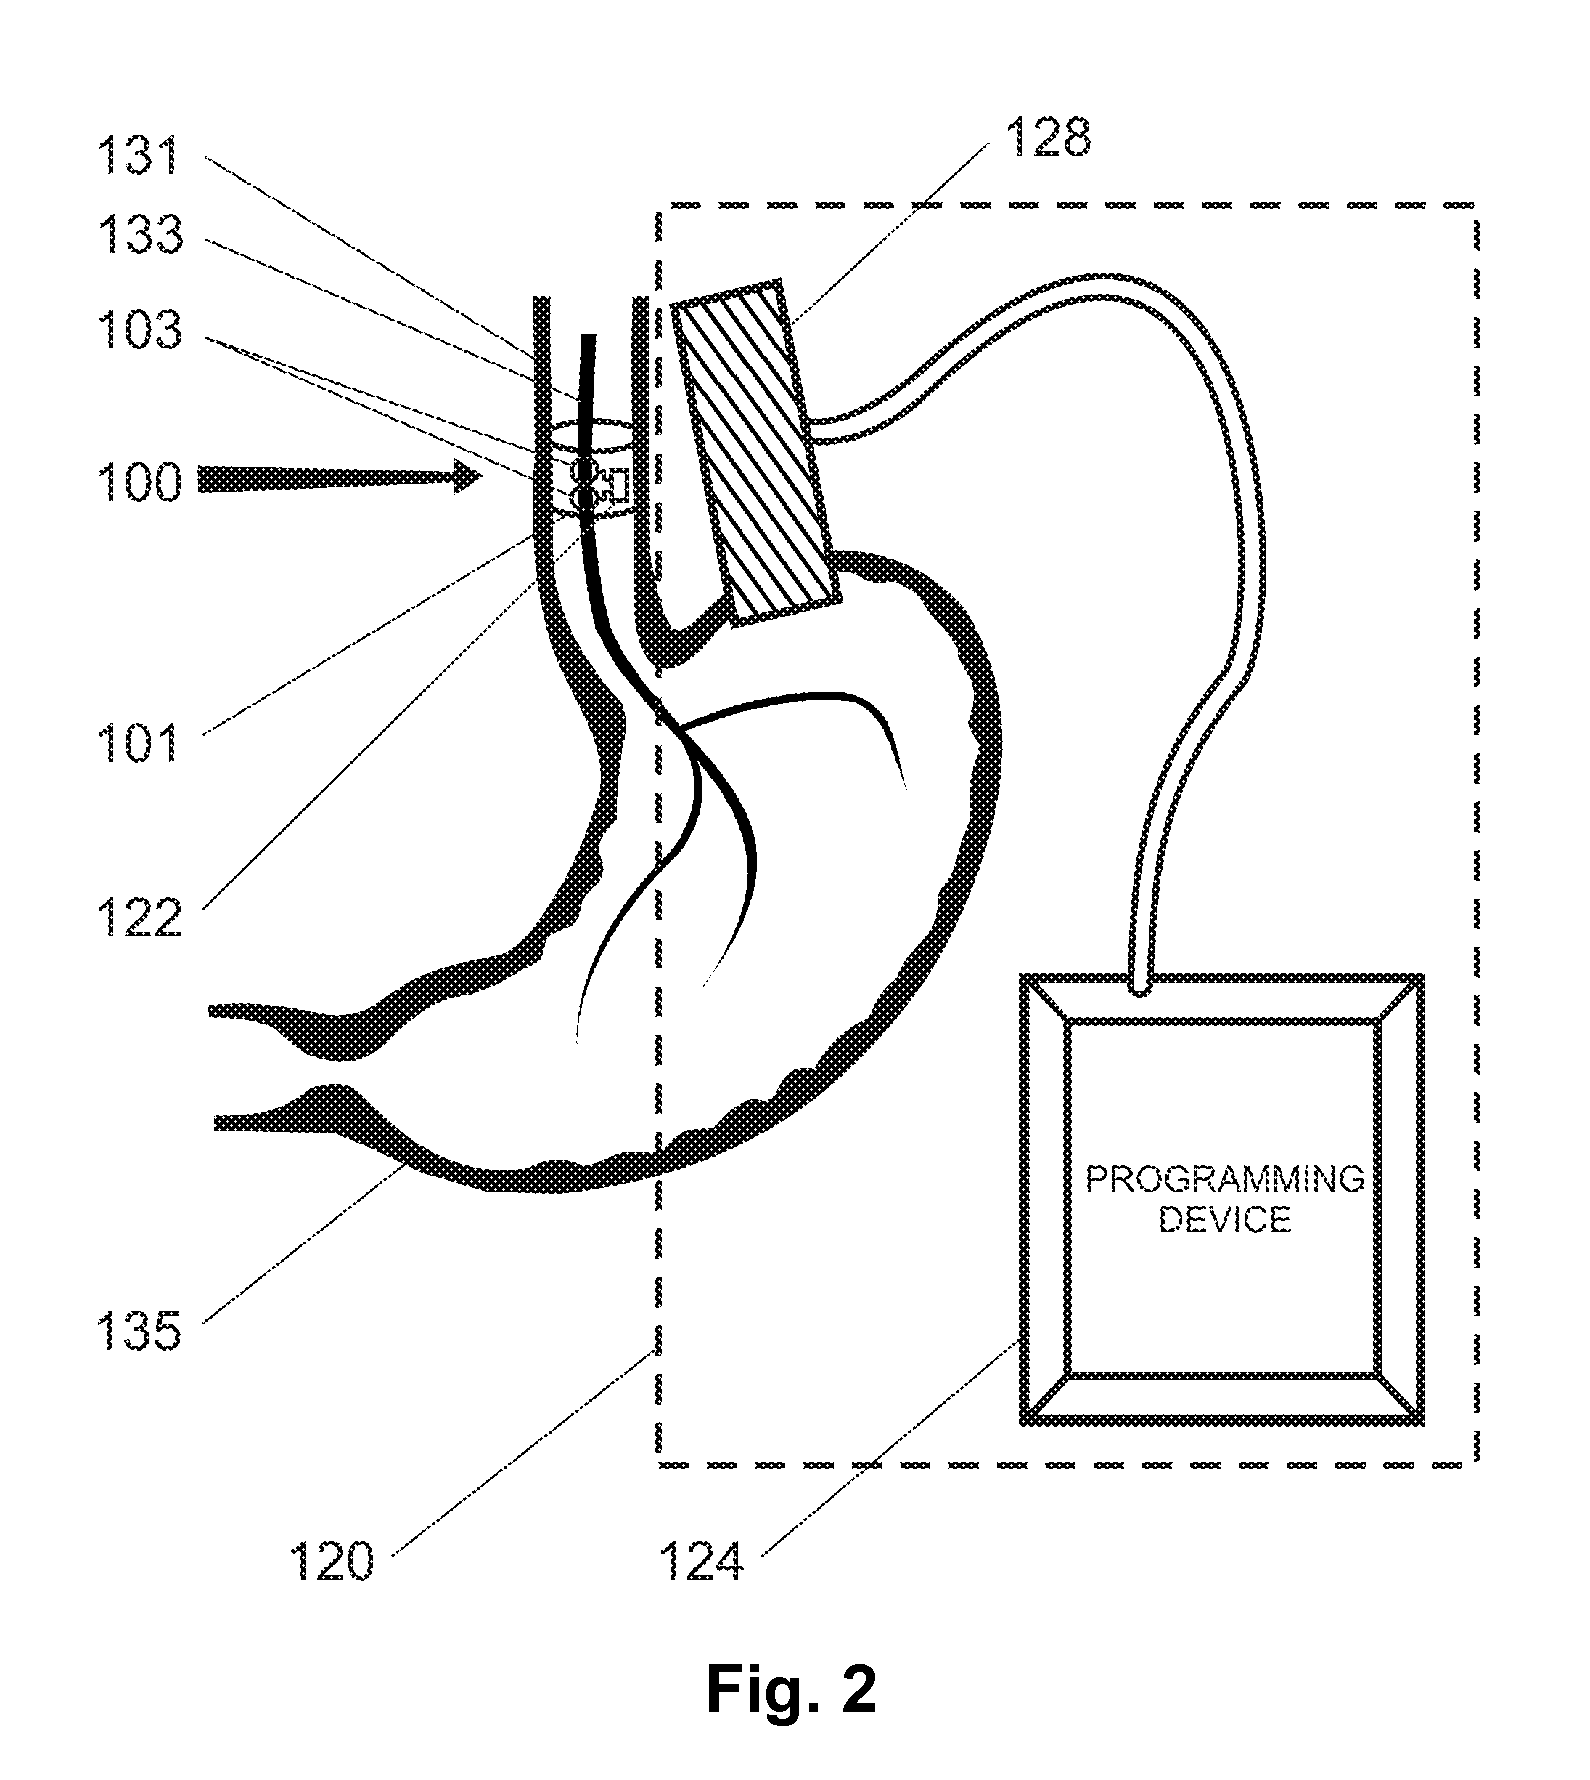 Non-surgical device and methods for trans-esophageal vagus nerve stimulation